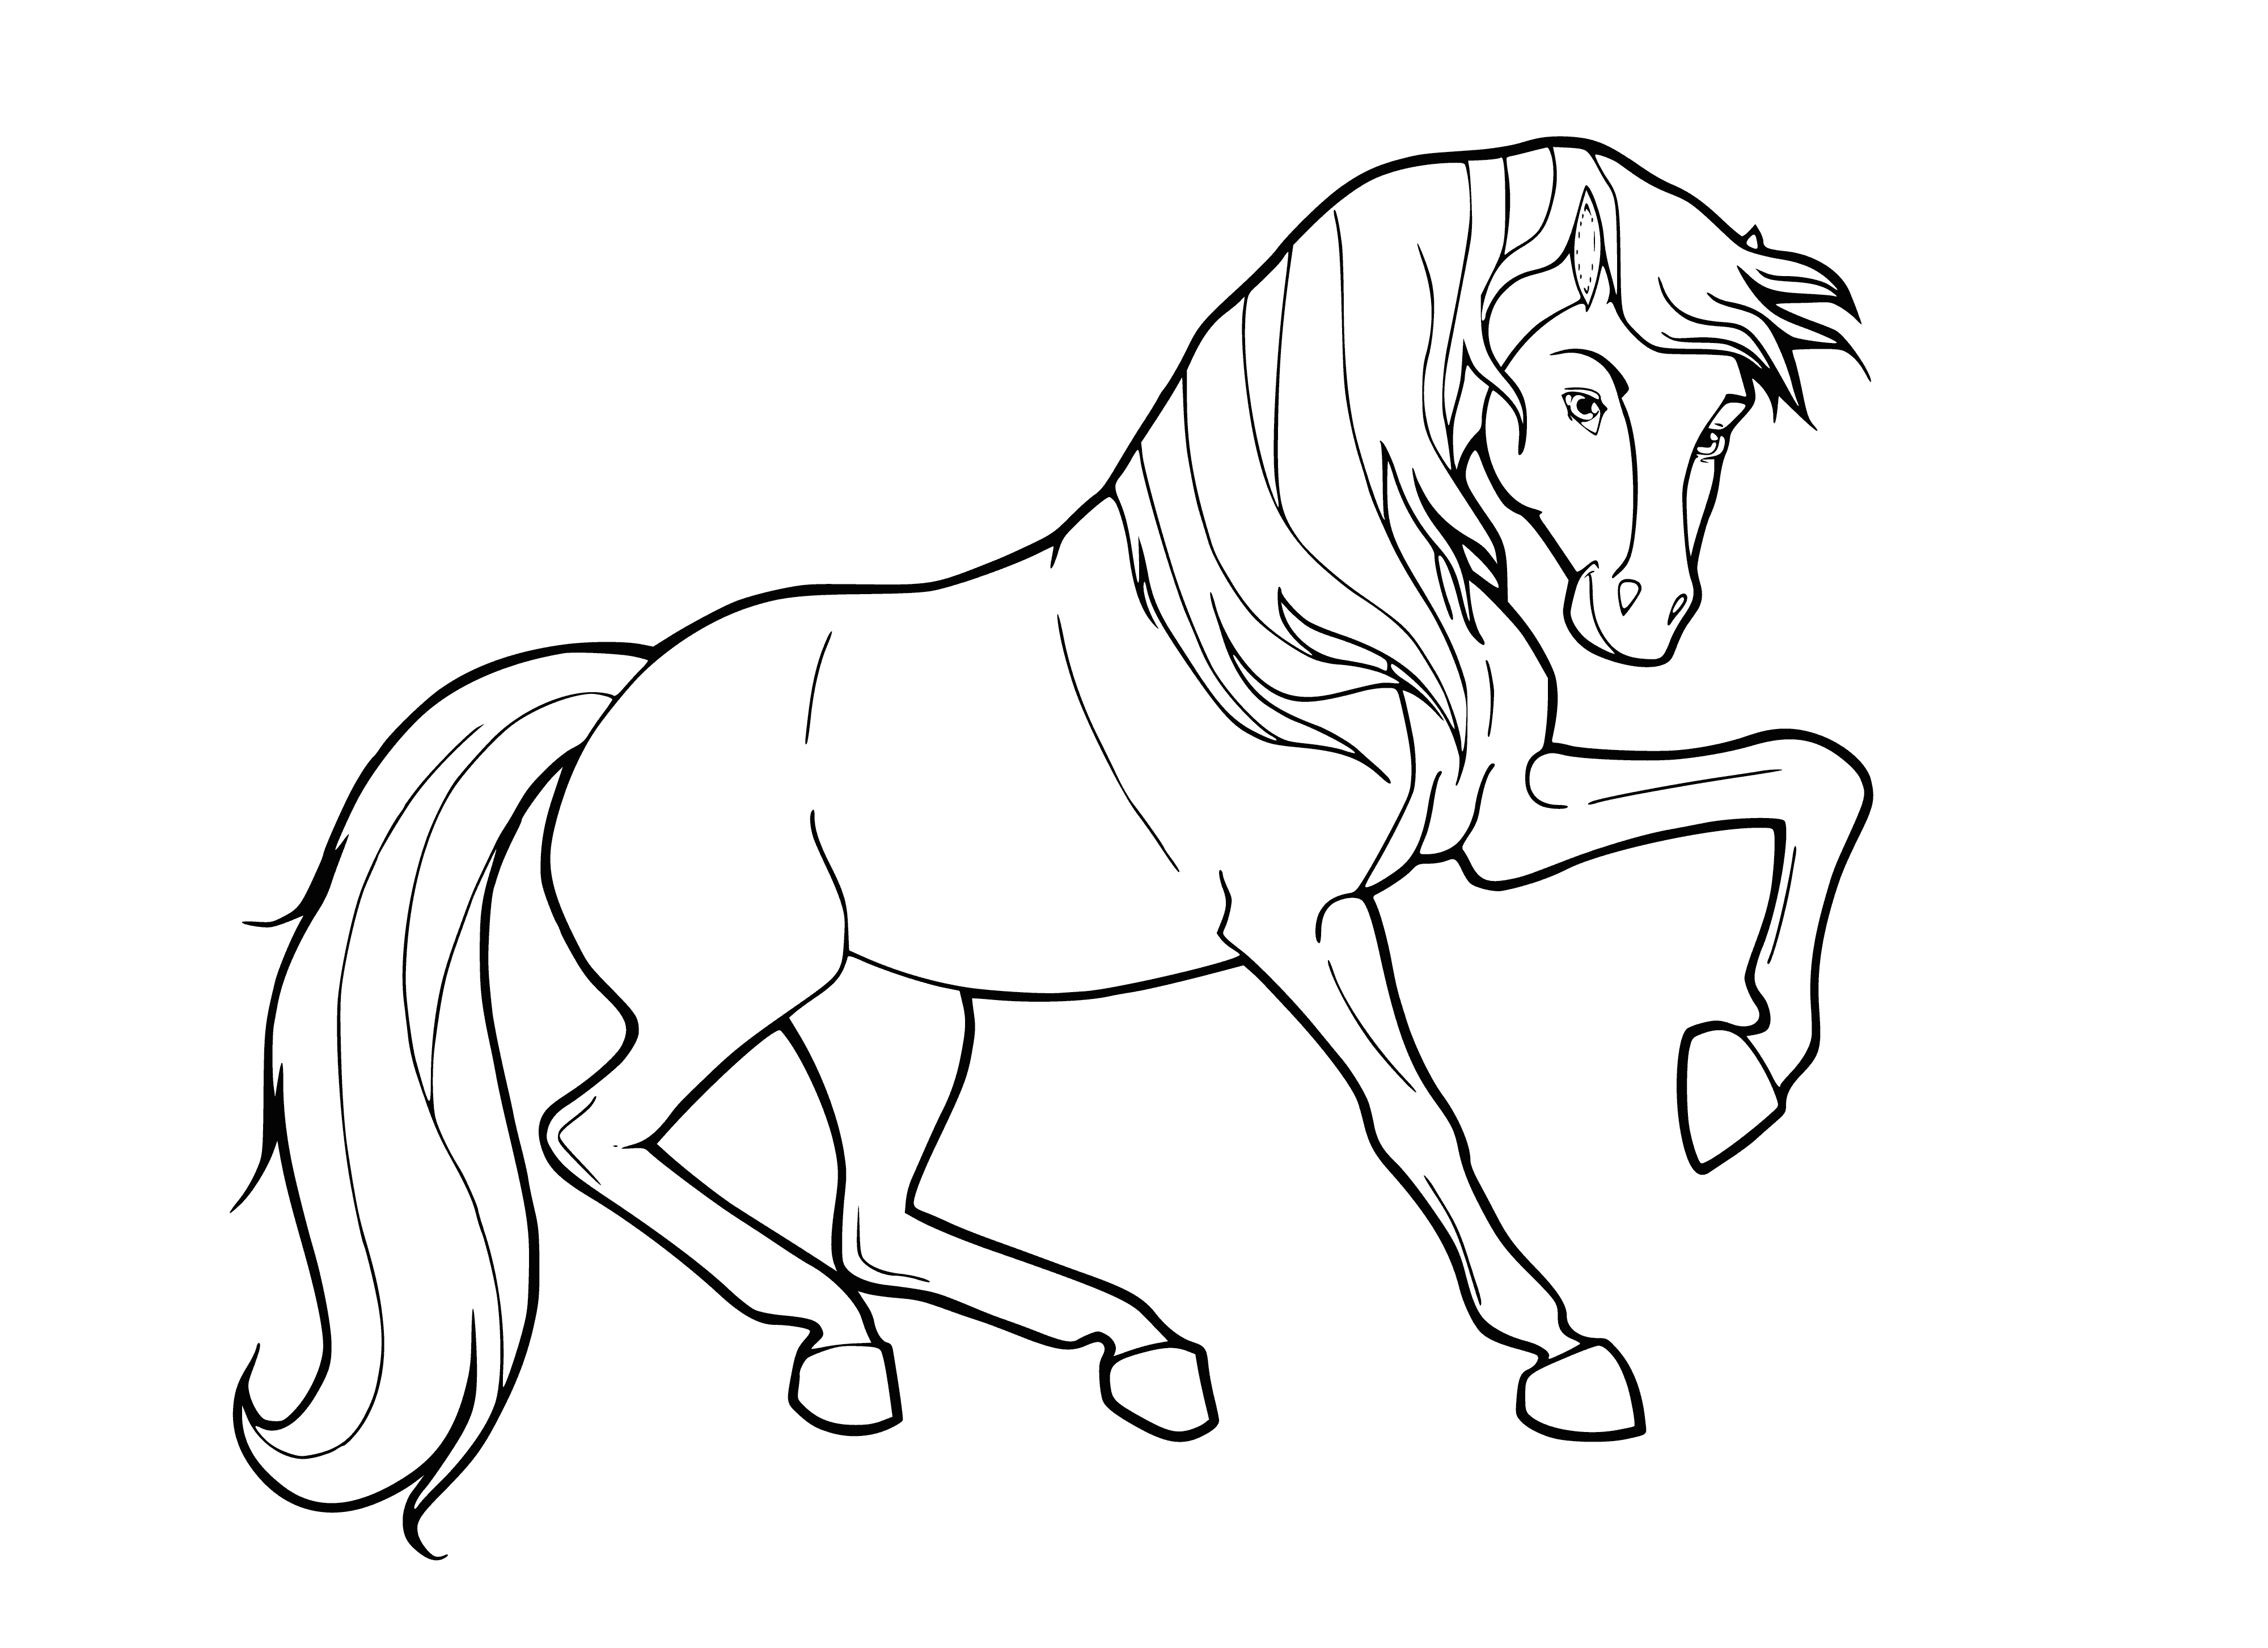 coloring page: Horses are four-legged mammals with long necks, a mane, and a tail. They eat grass & hay for sustenance & are used for transportation, recreation, & work.